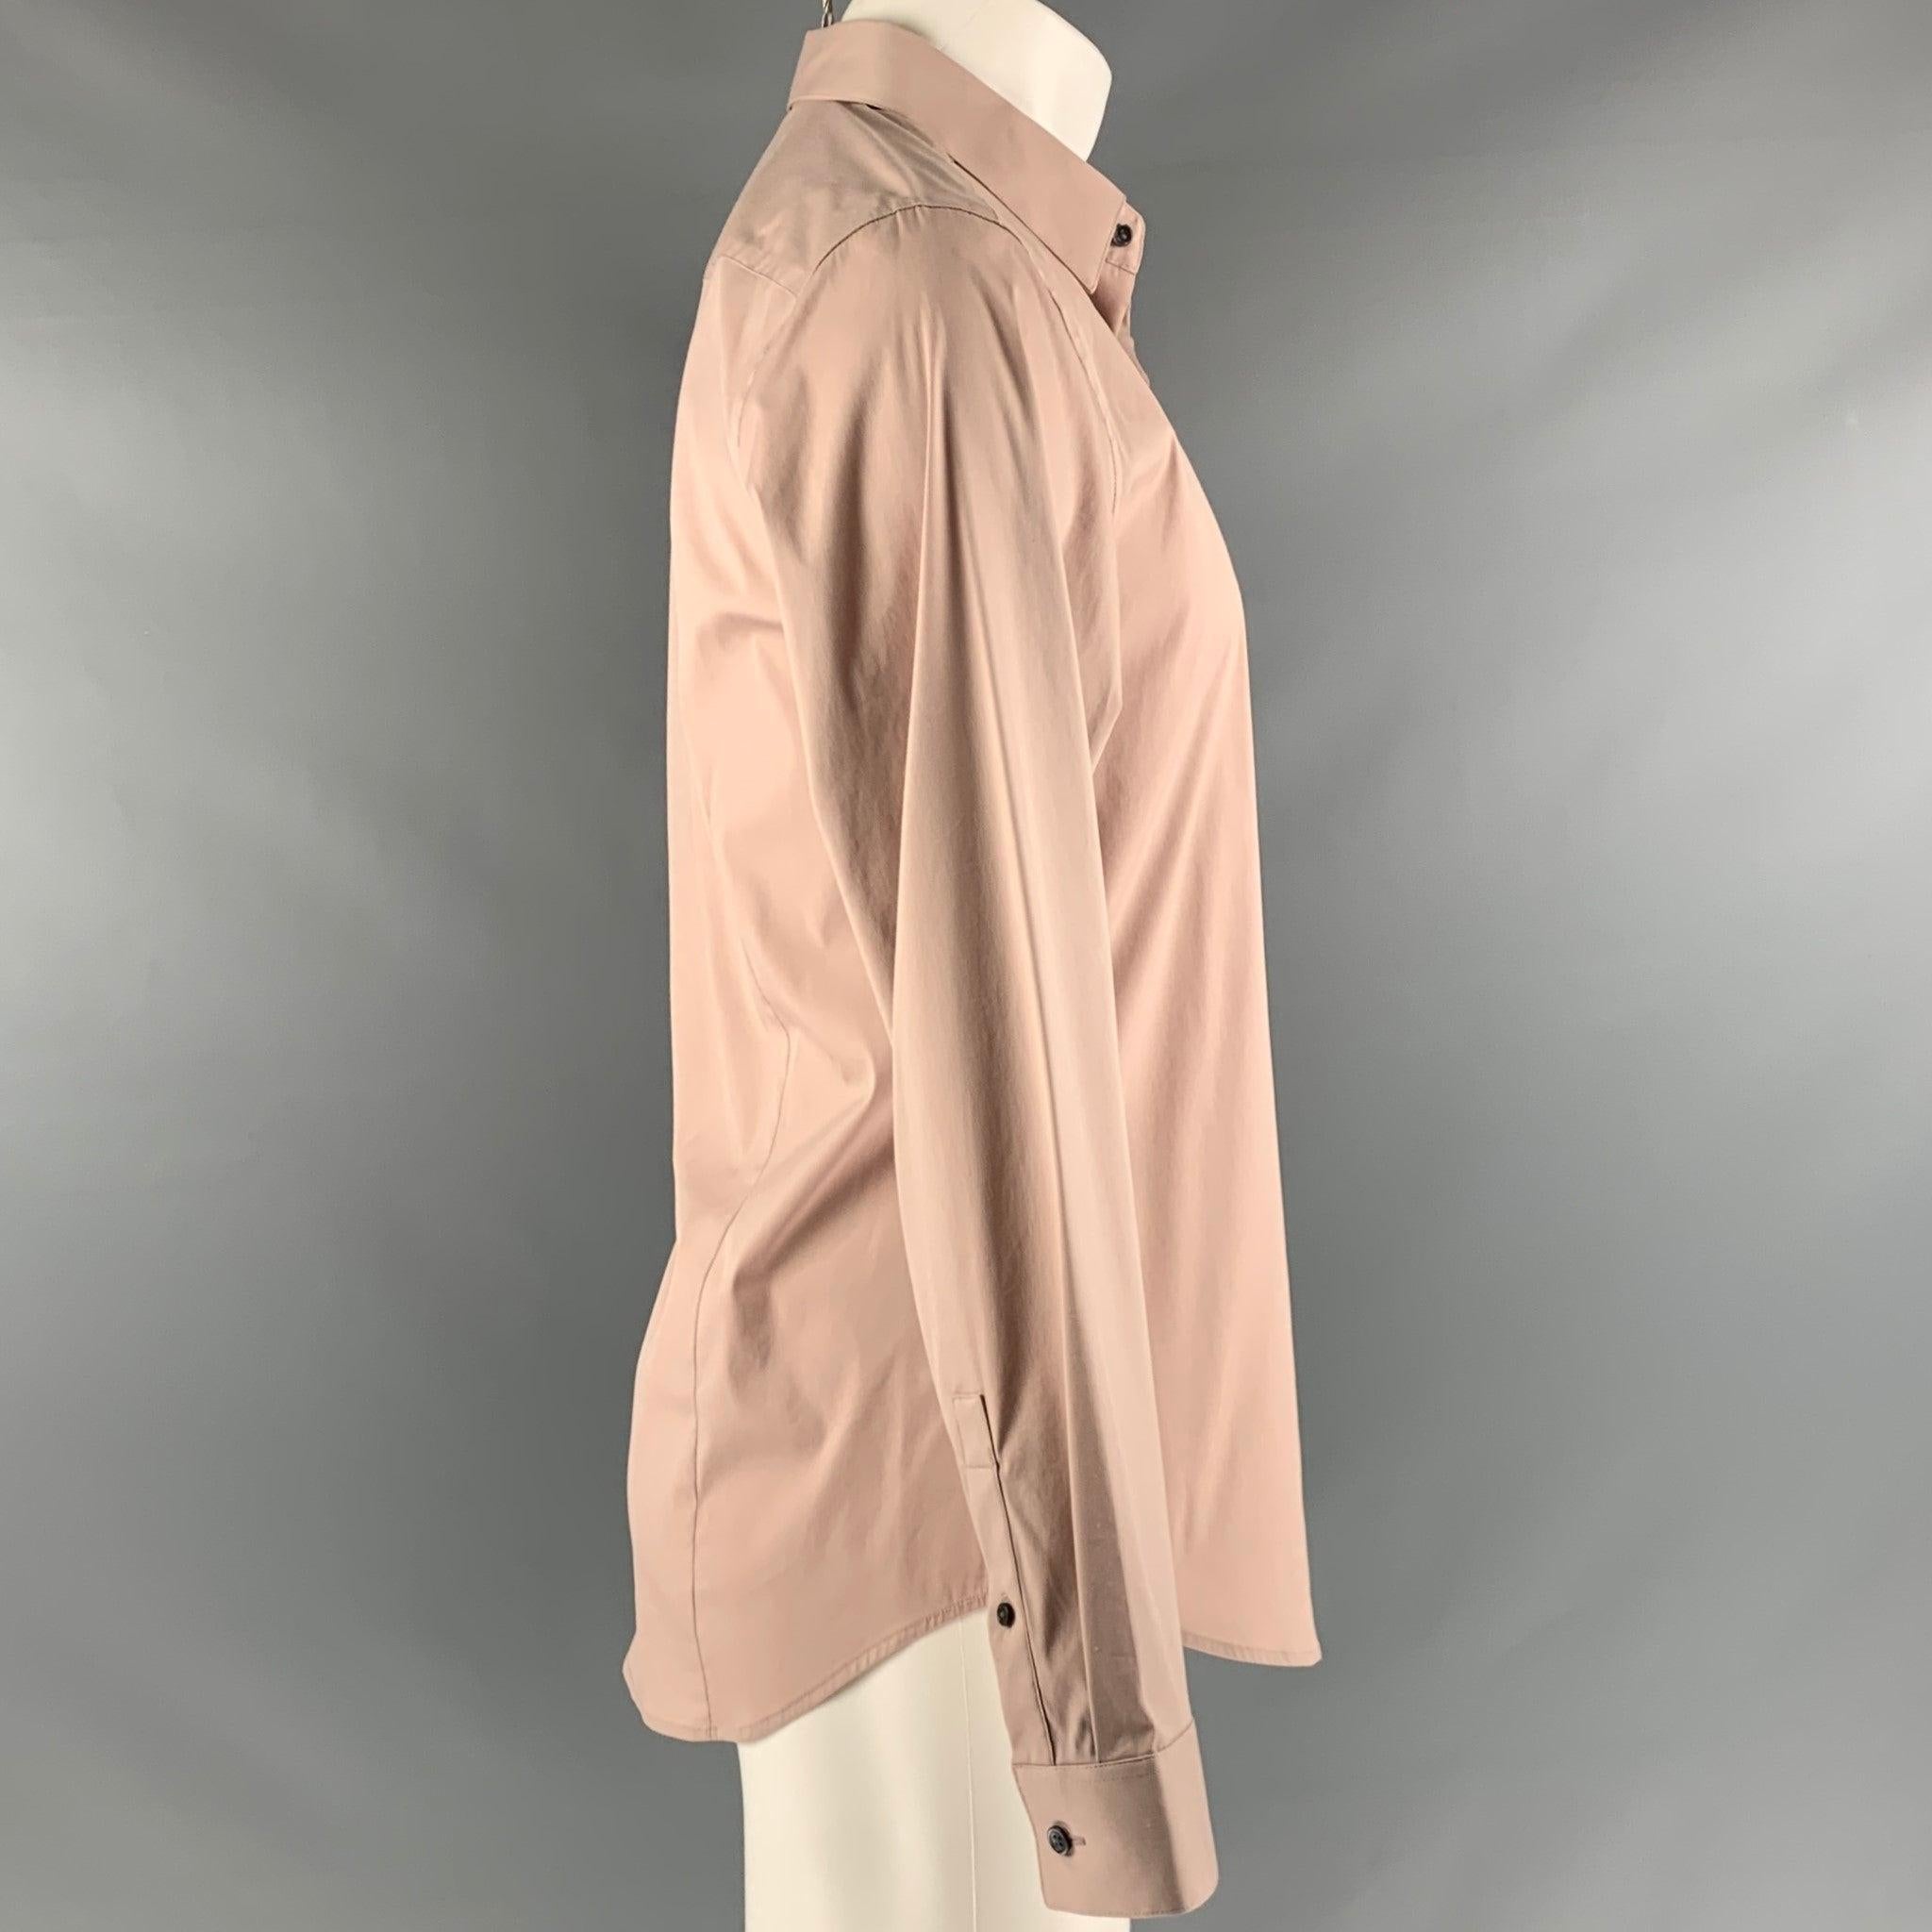 THEORY
long sleeve shirt in a dusty pink cotton blend featuring a regular fit and spread collar.Very Good Pre-Owned Condition. Minor pilling. 

Marked:   XL 

Measurements: 
 
Shoulder: 18 inches Chest: 41 inches Sleeve: 27 inches Length: 28 inches